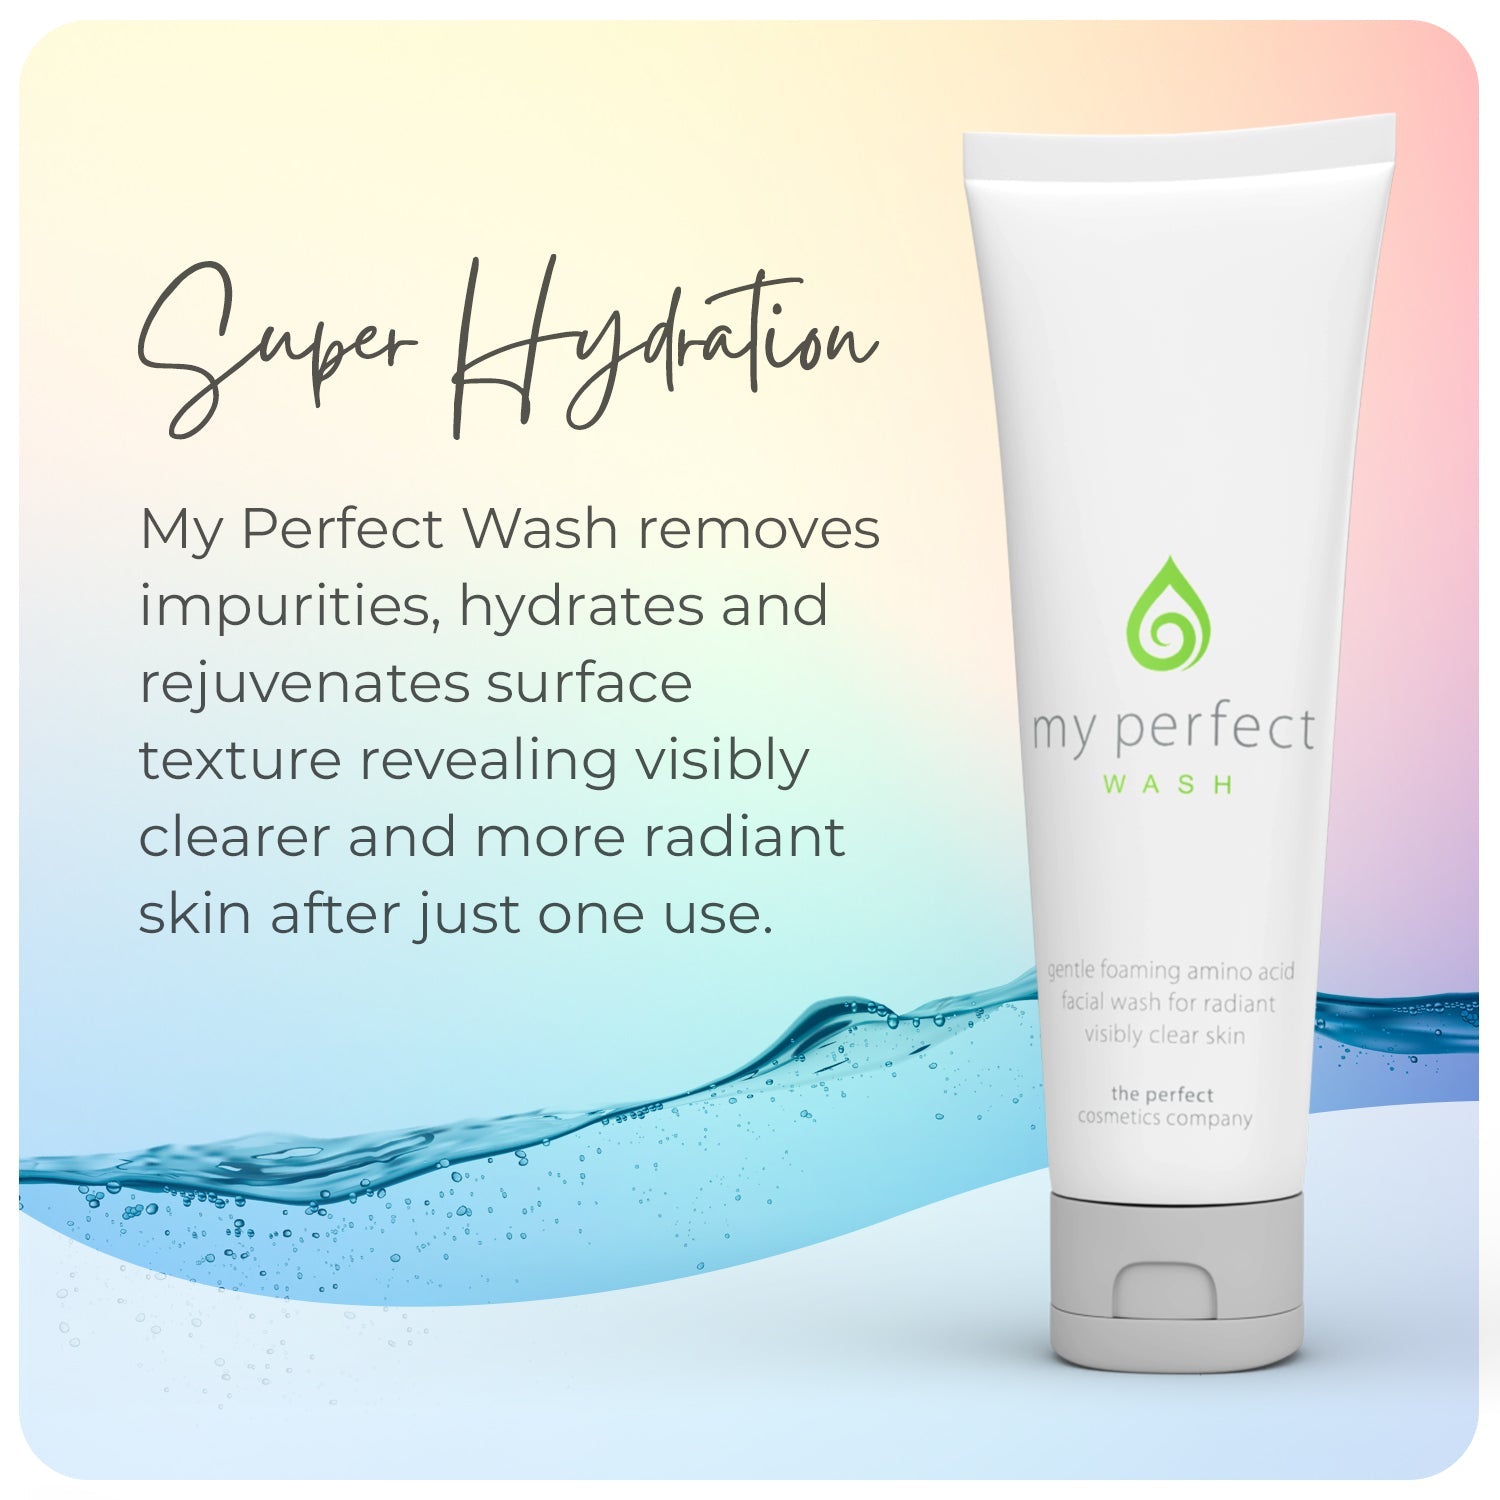 Special Offer: My Perfect Wash